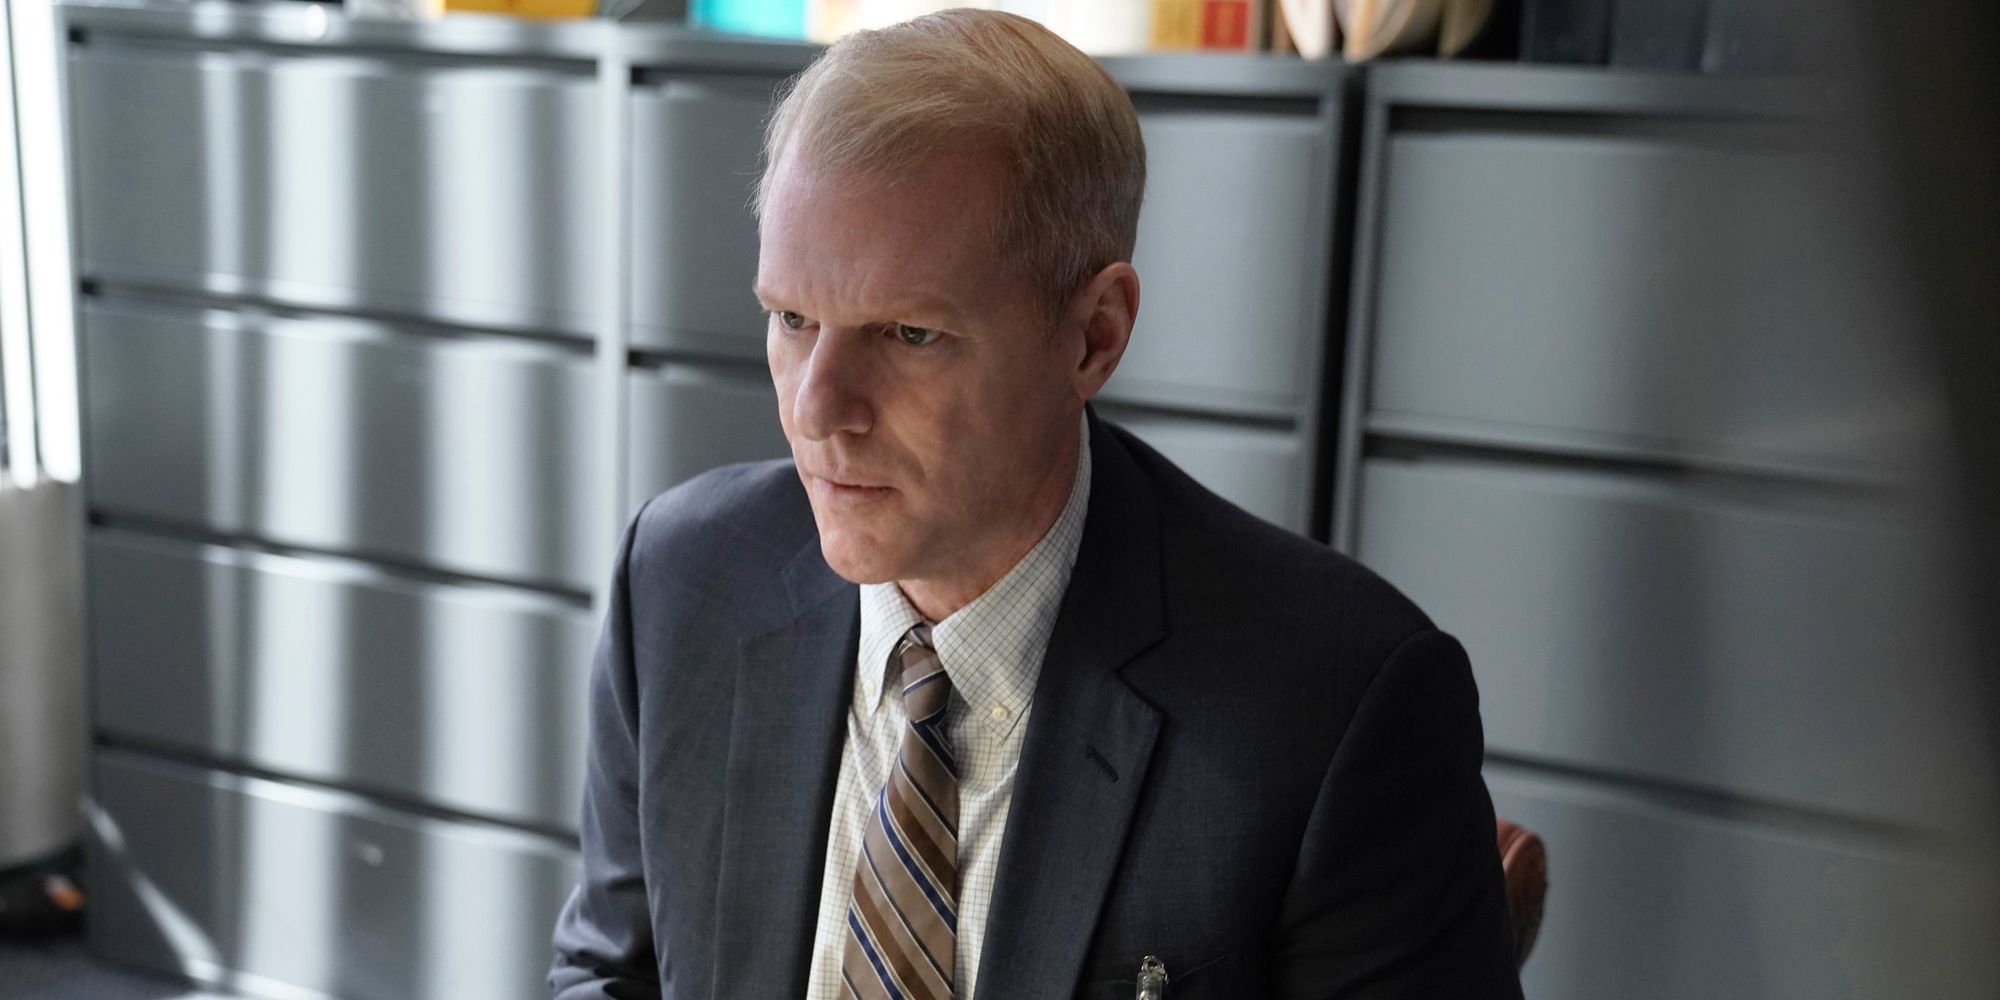 Noah Emmerich in The Americans